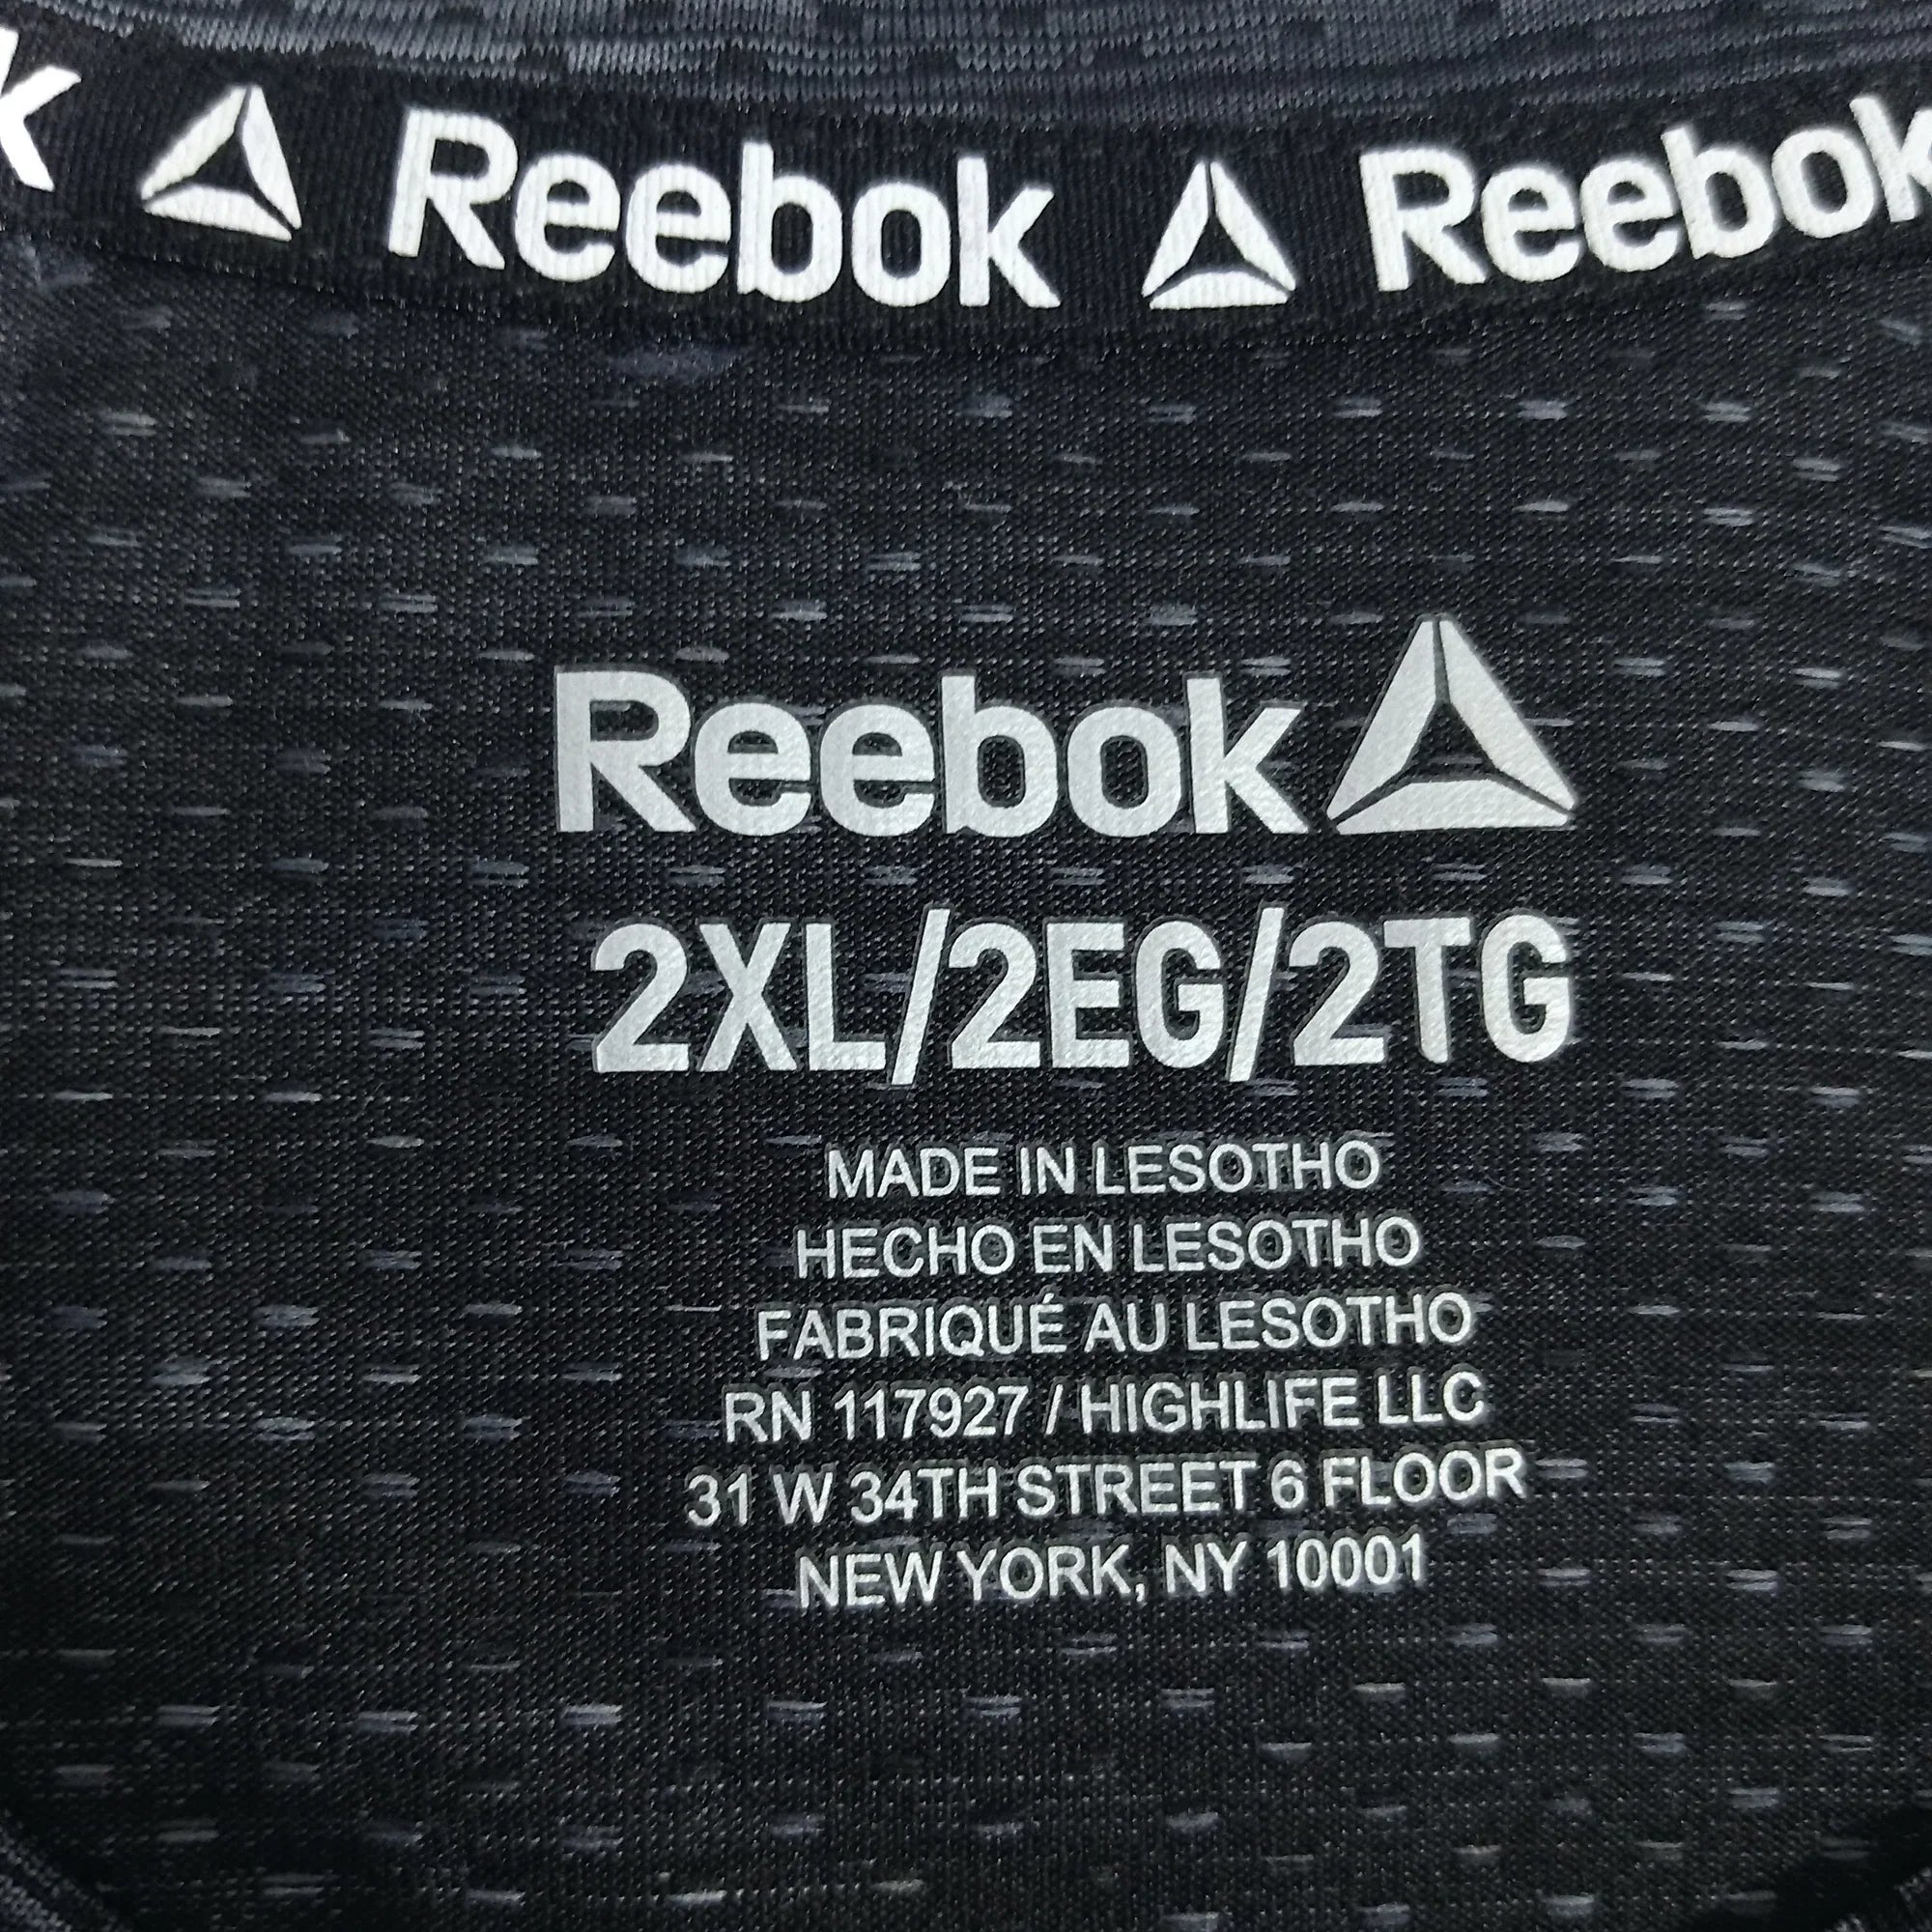 Step up your style game with Reebok products at Flashback Fashion Store - Your Ultimate Athletic and Fashion Essentials!"